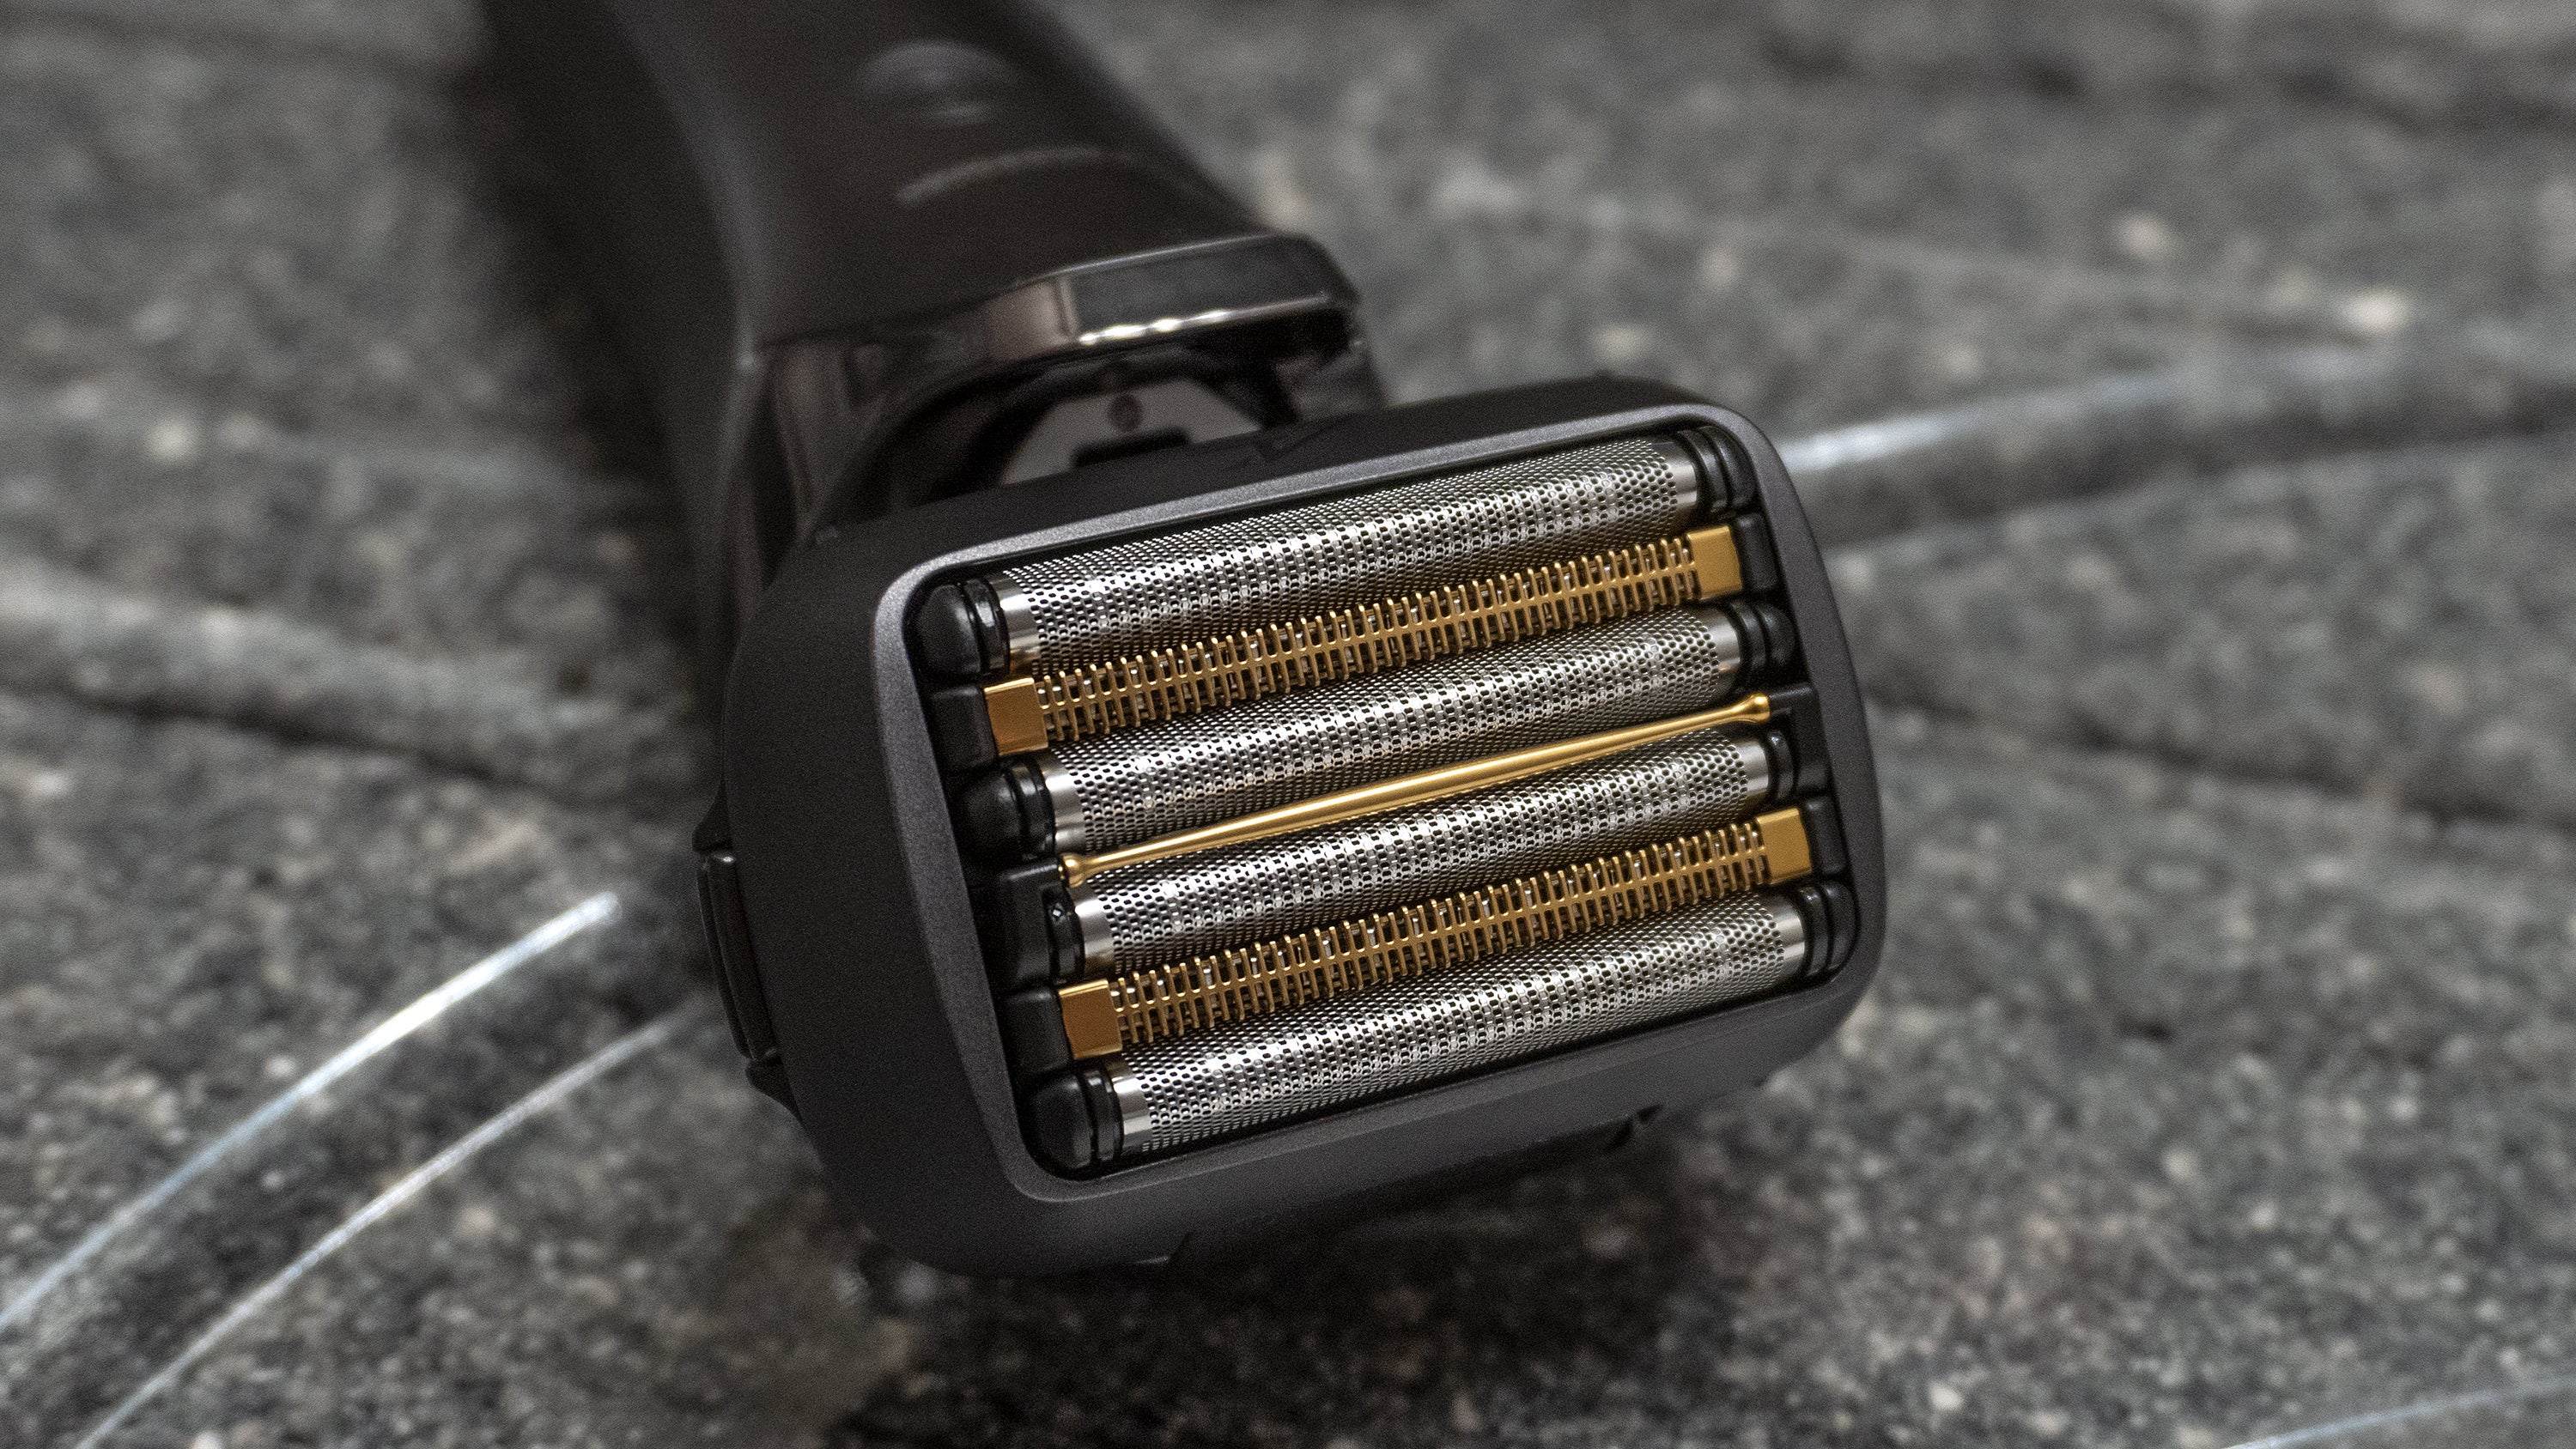 Although gentle and effective, the Arc6 isn't a complete revolution in electric razors. But it's definitely a step up. (Photo: Andrew Liszewski | Gizmodo)